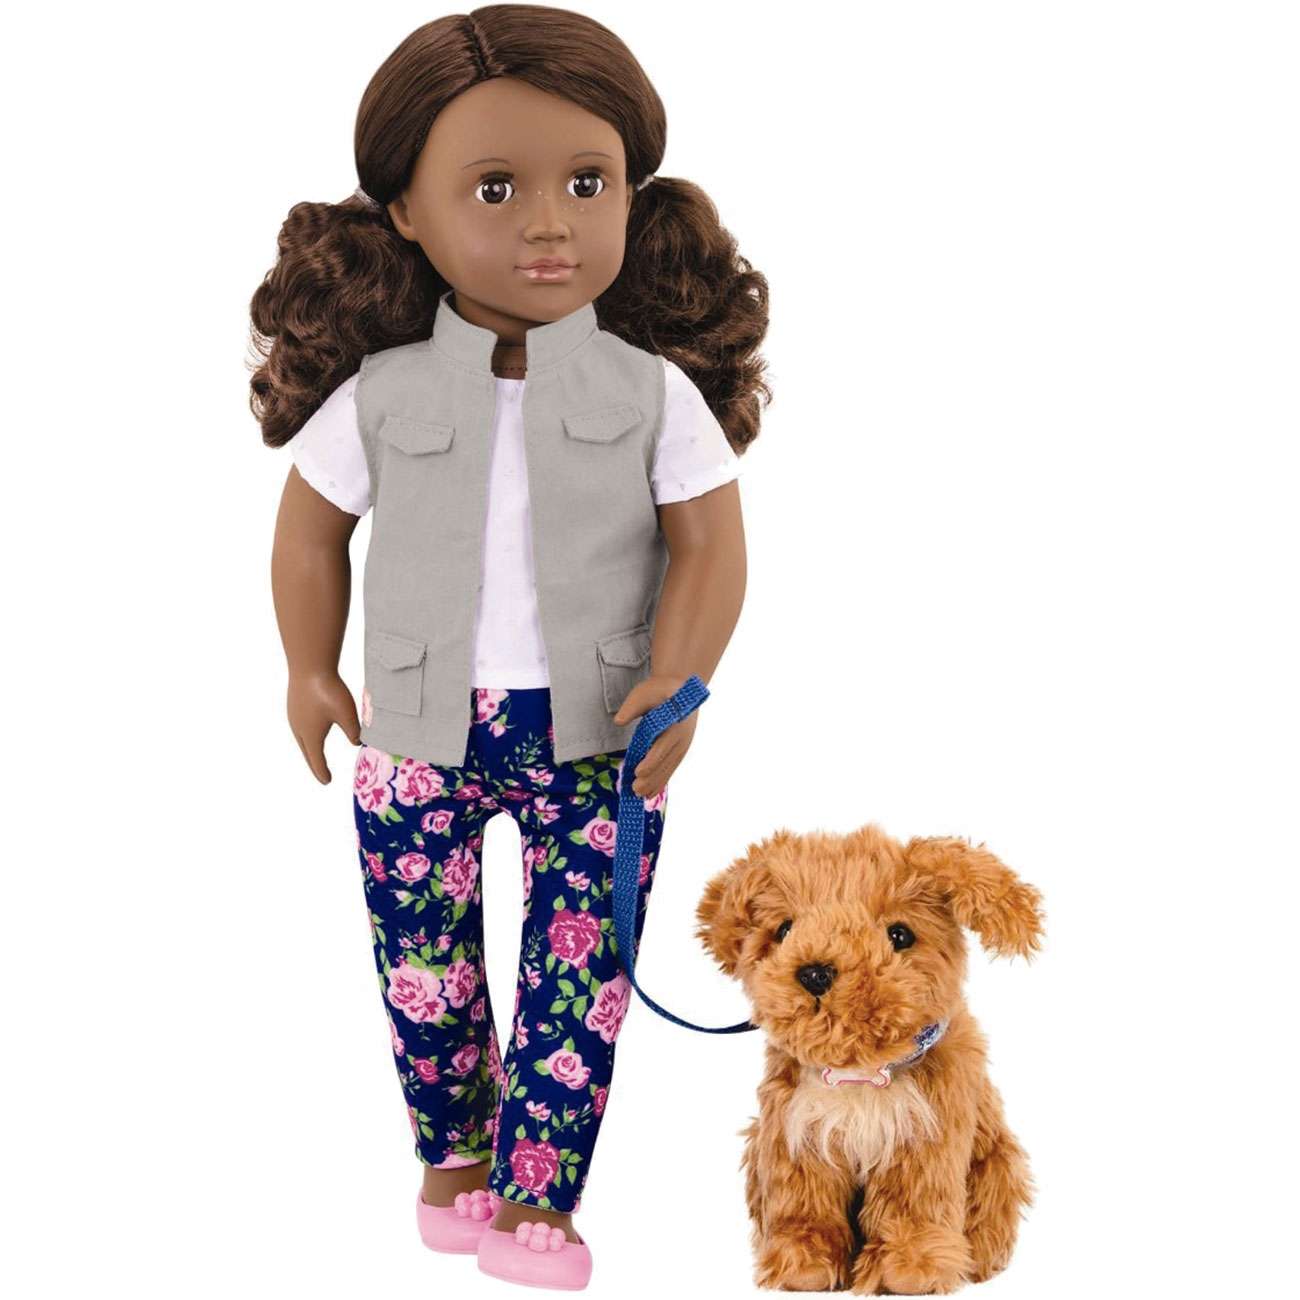 Our Generation - Malia Doll and Pet Poodle (731202)